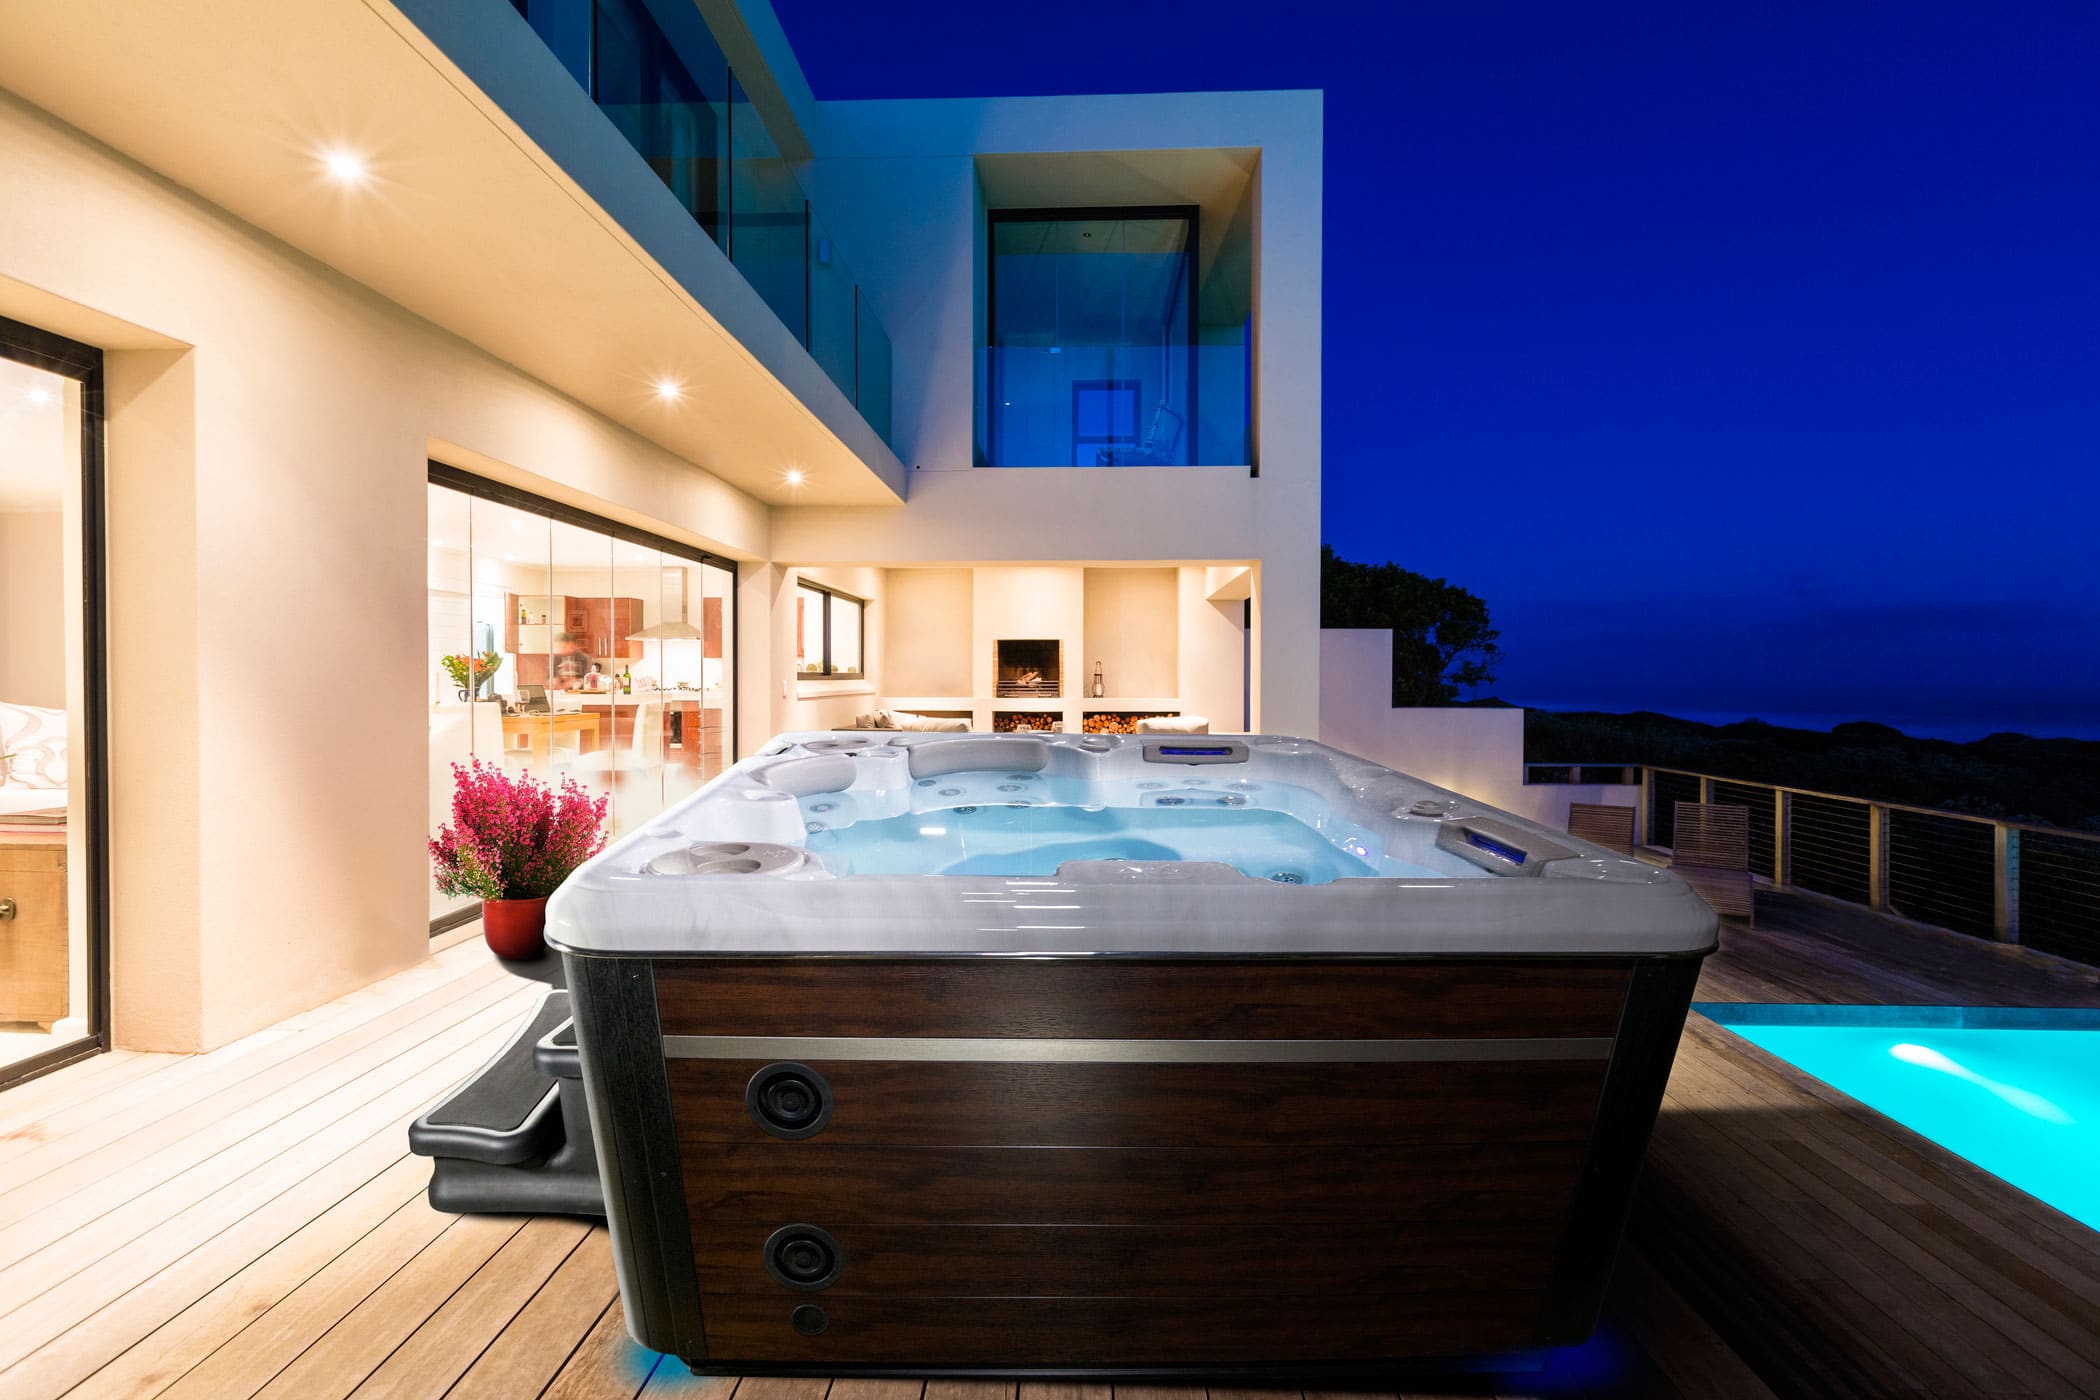 Hot Tub or Jacuzzi?, Differences Explained